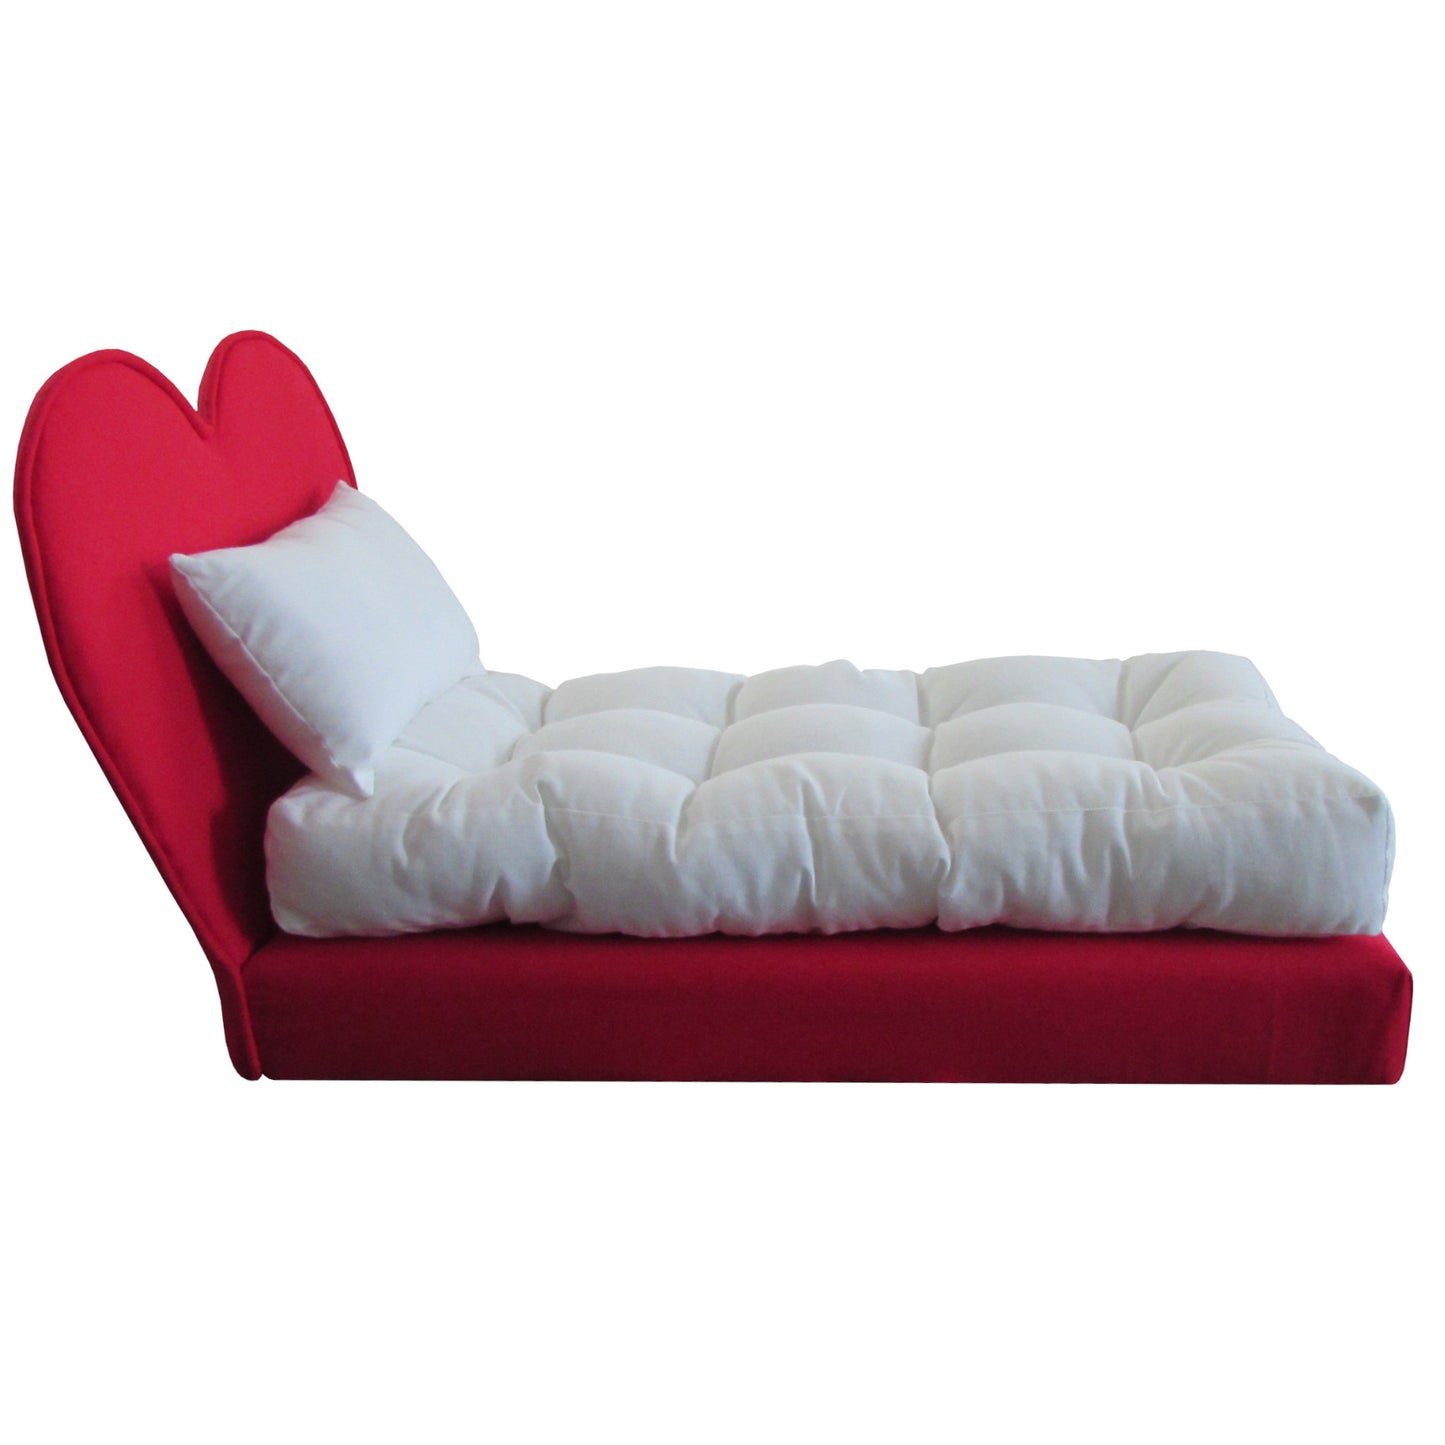 Upholstered Red Heart Doll Bed for 18-inch dolls